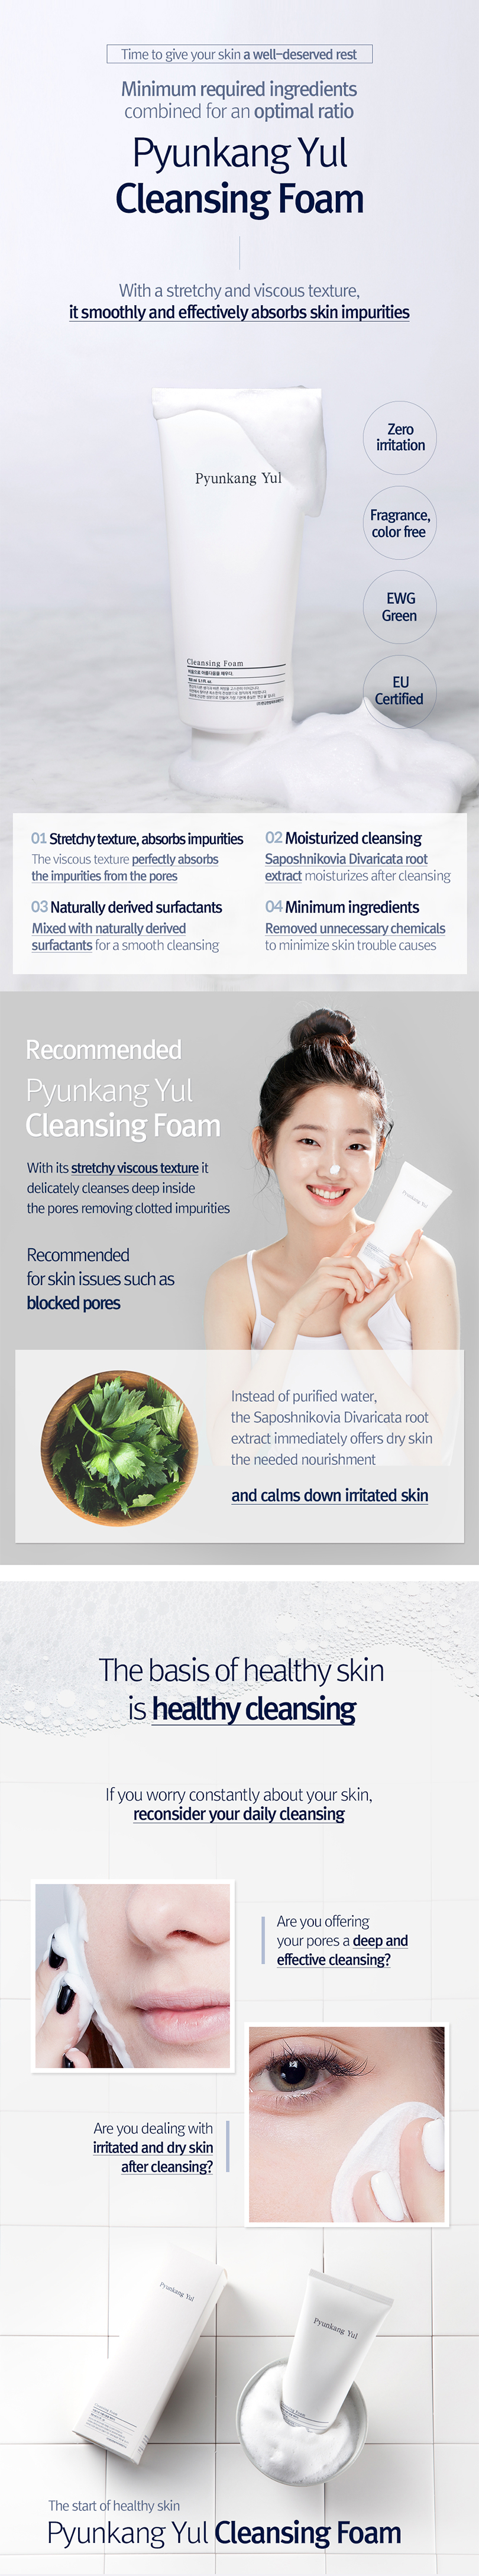 Gentle and effective cleansingPurifies and rejuvenates the skin